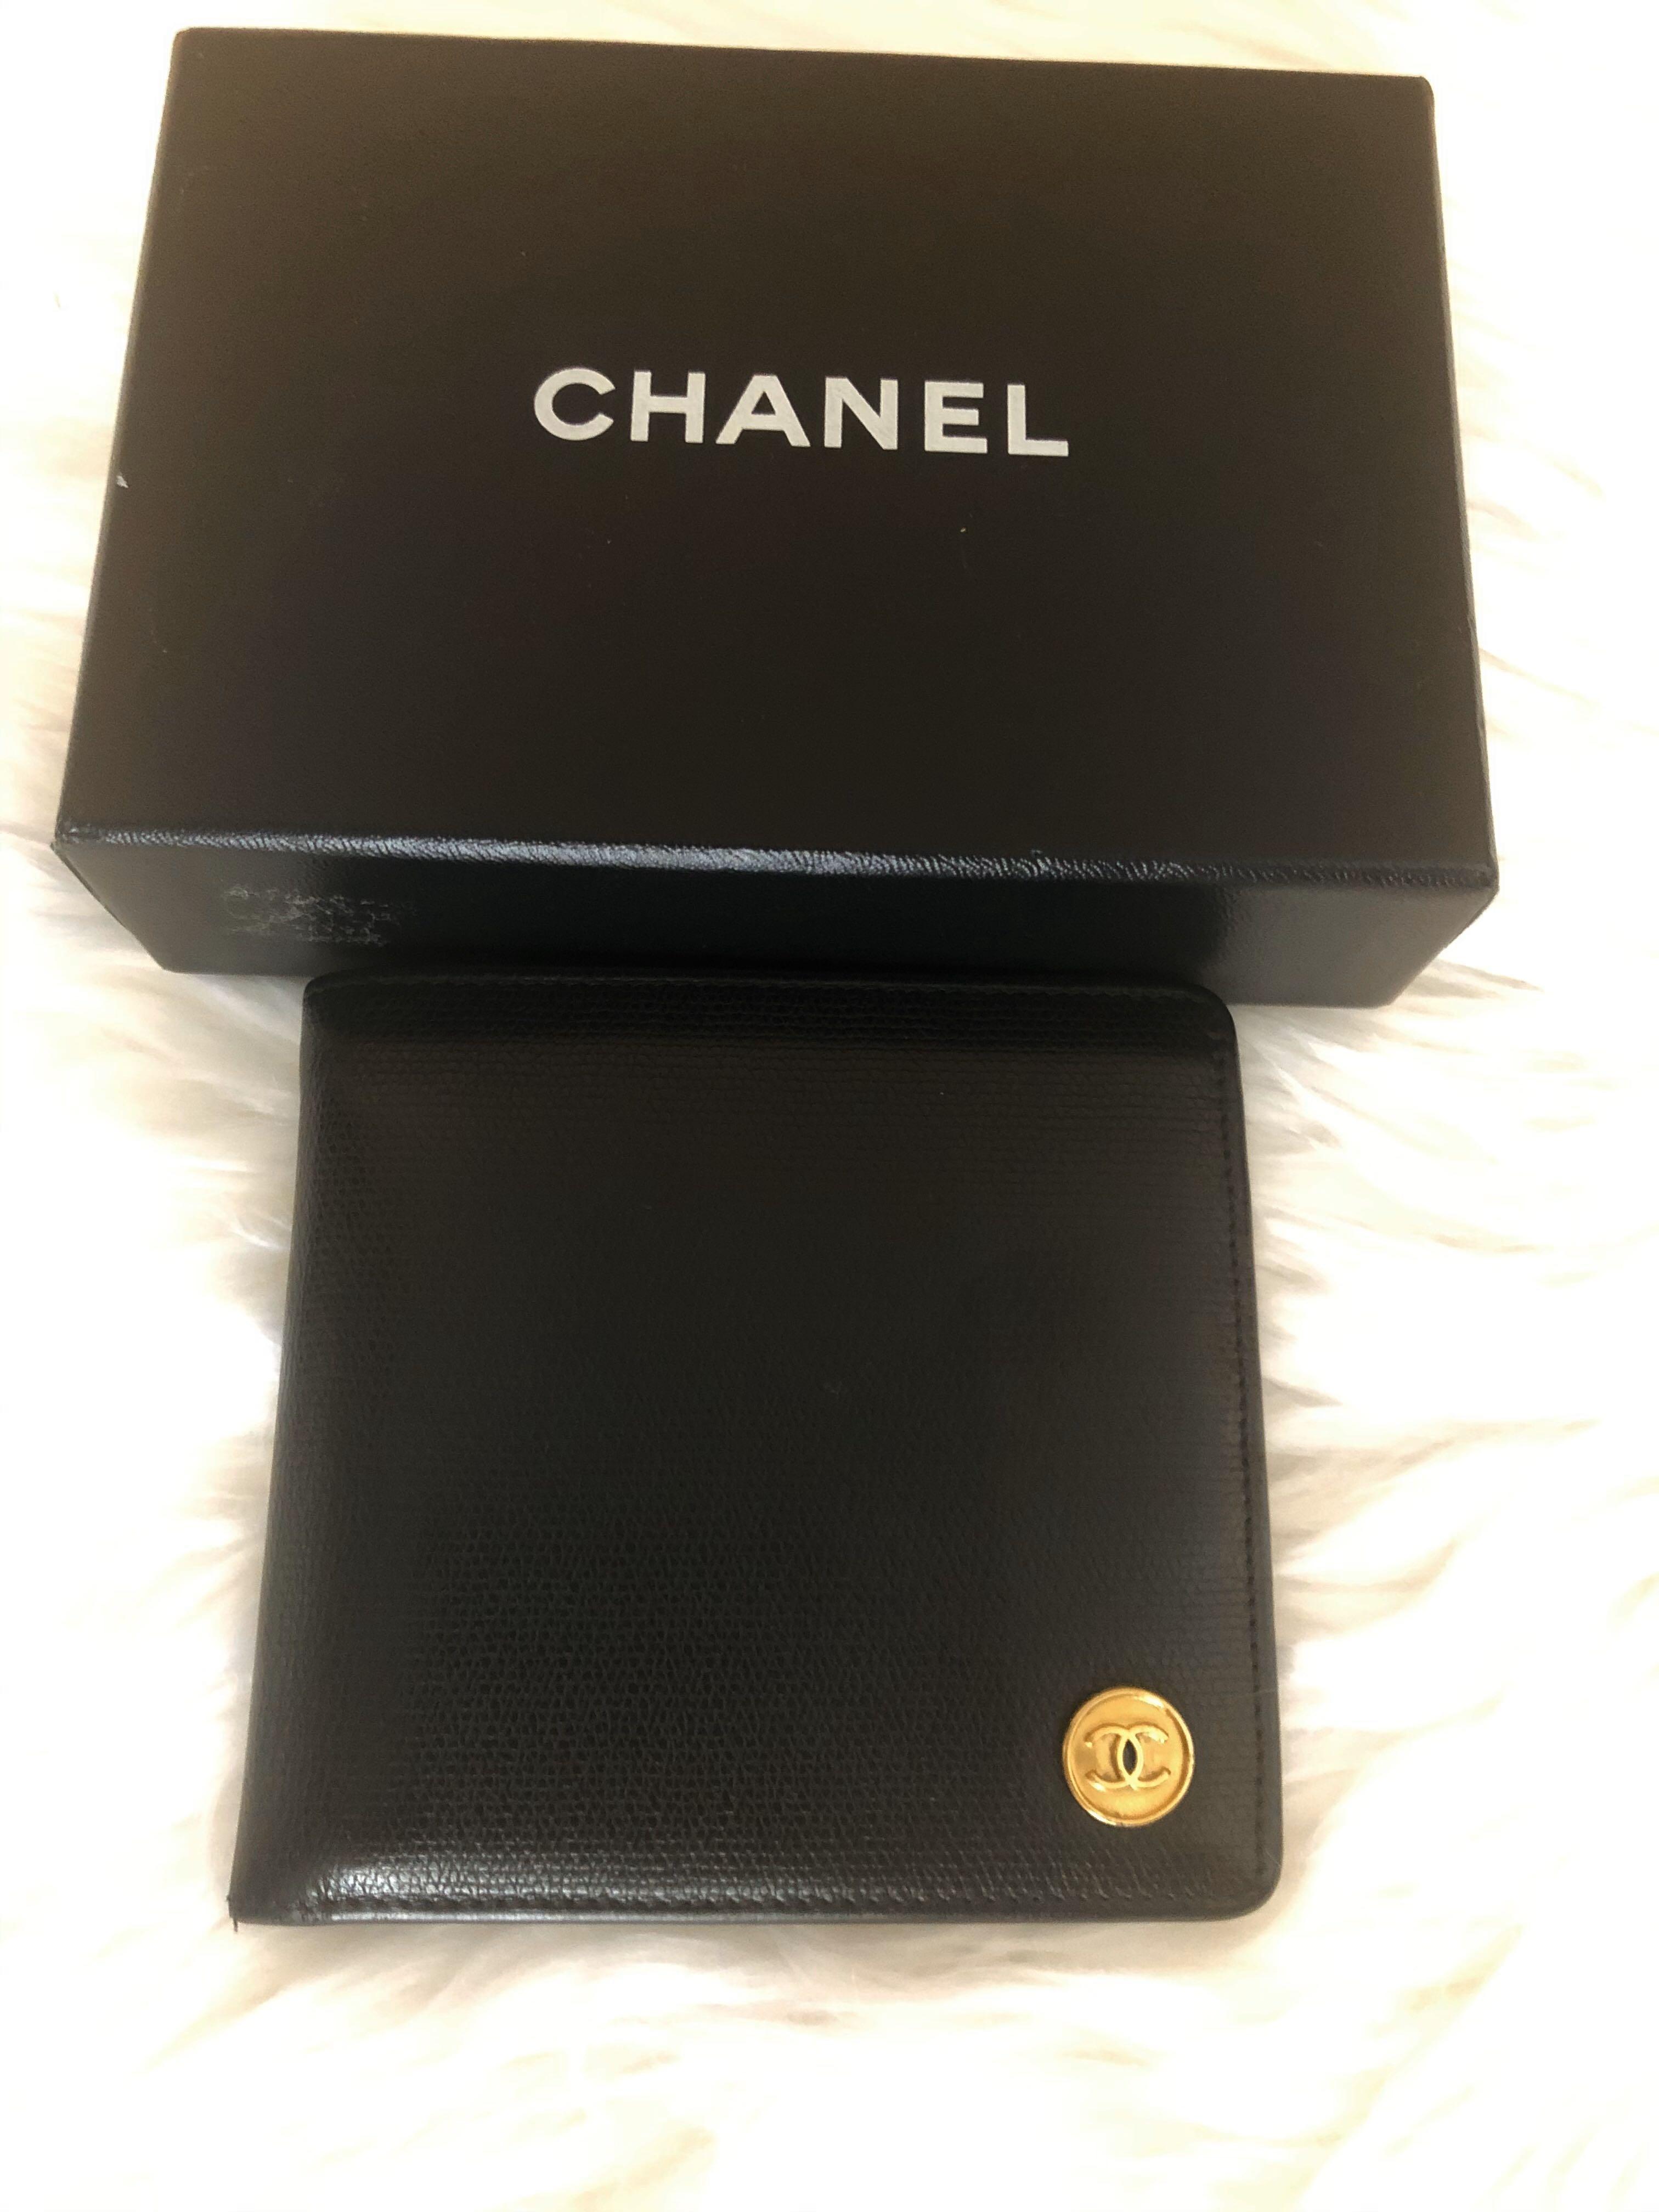 Authentic Chanel Men's Bi-fold Wallet, calf leather, with hologram